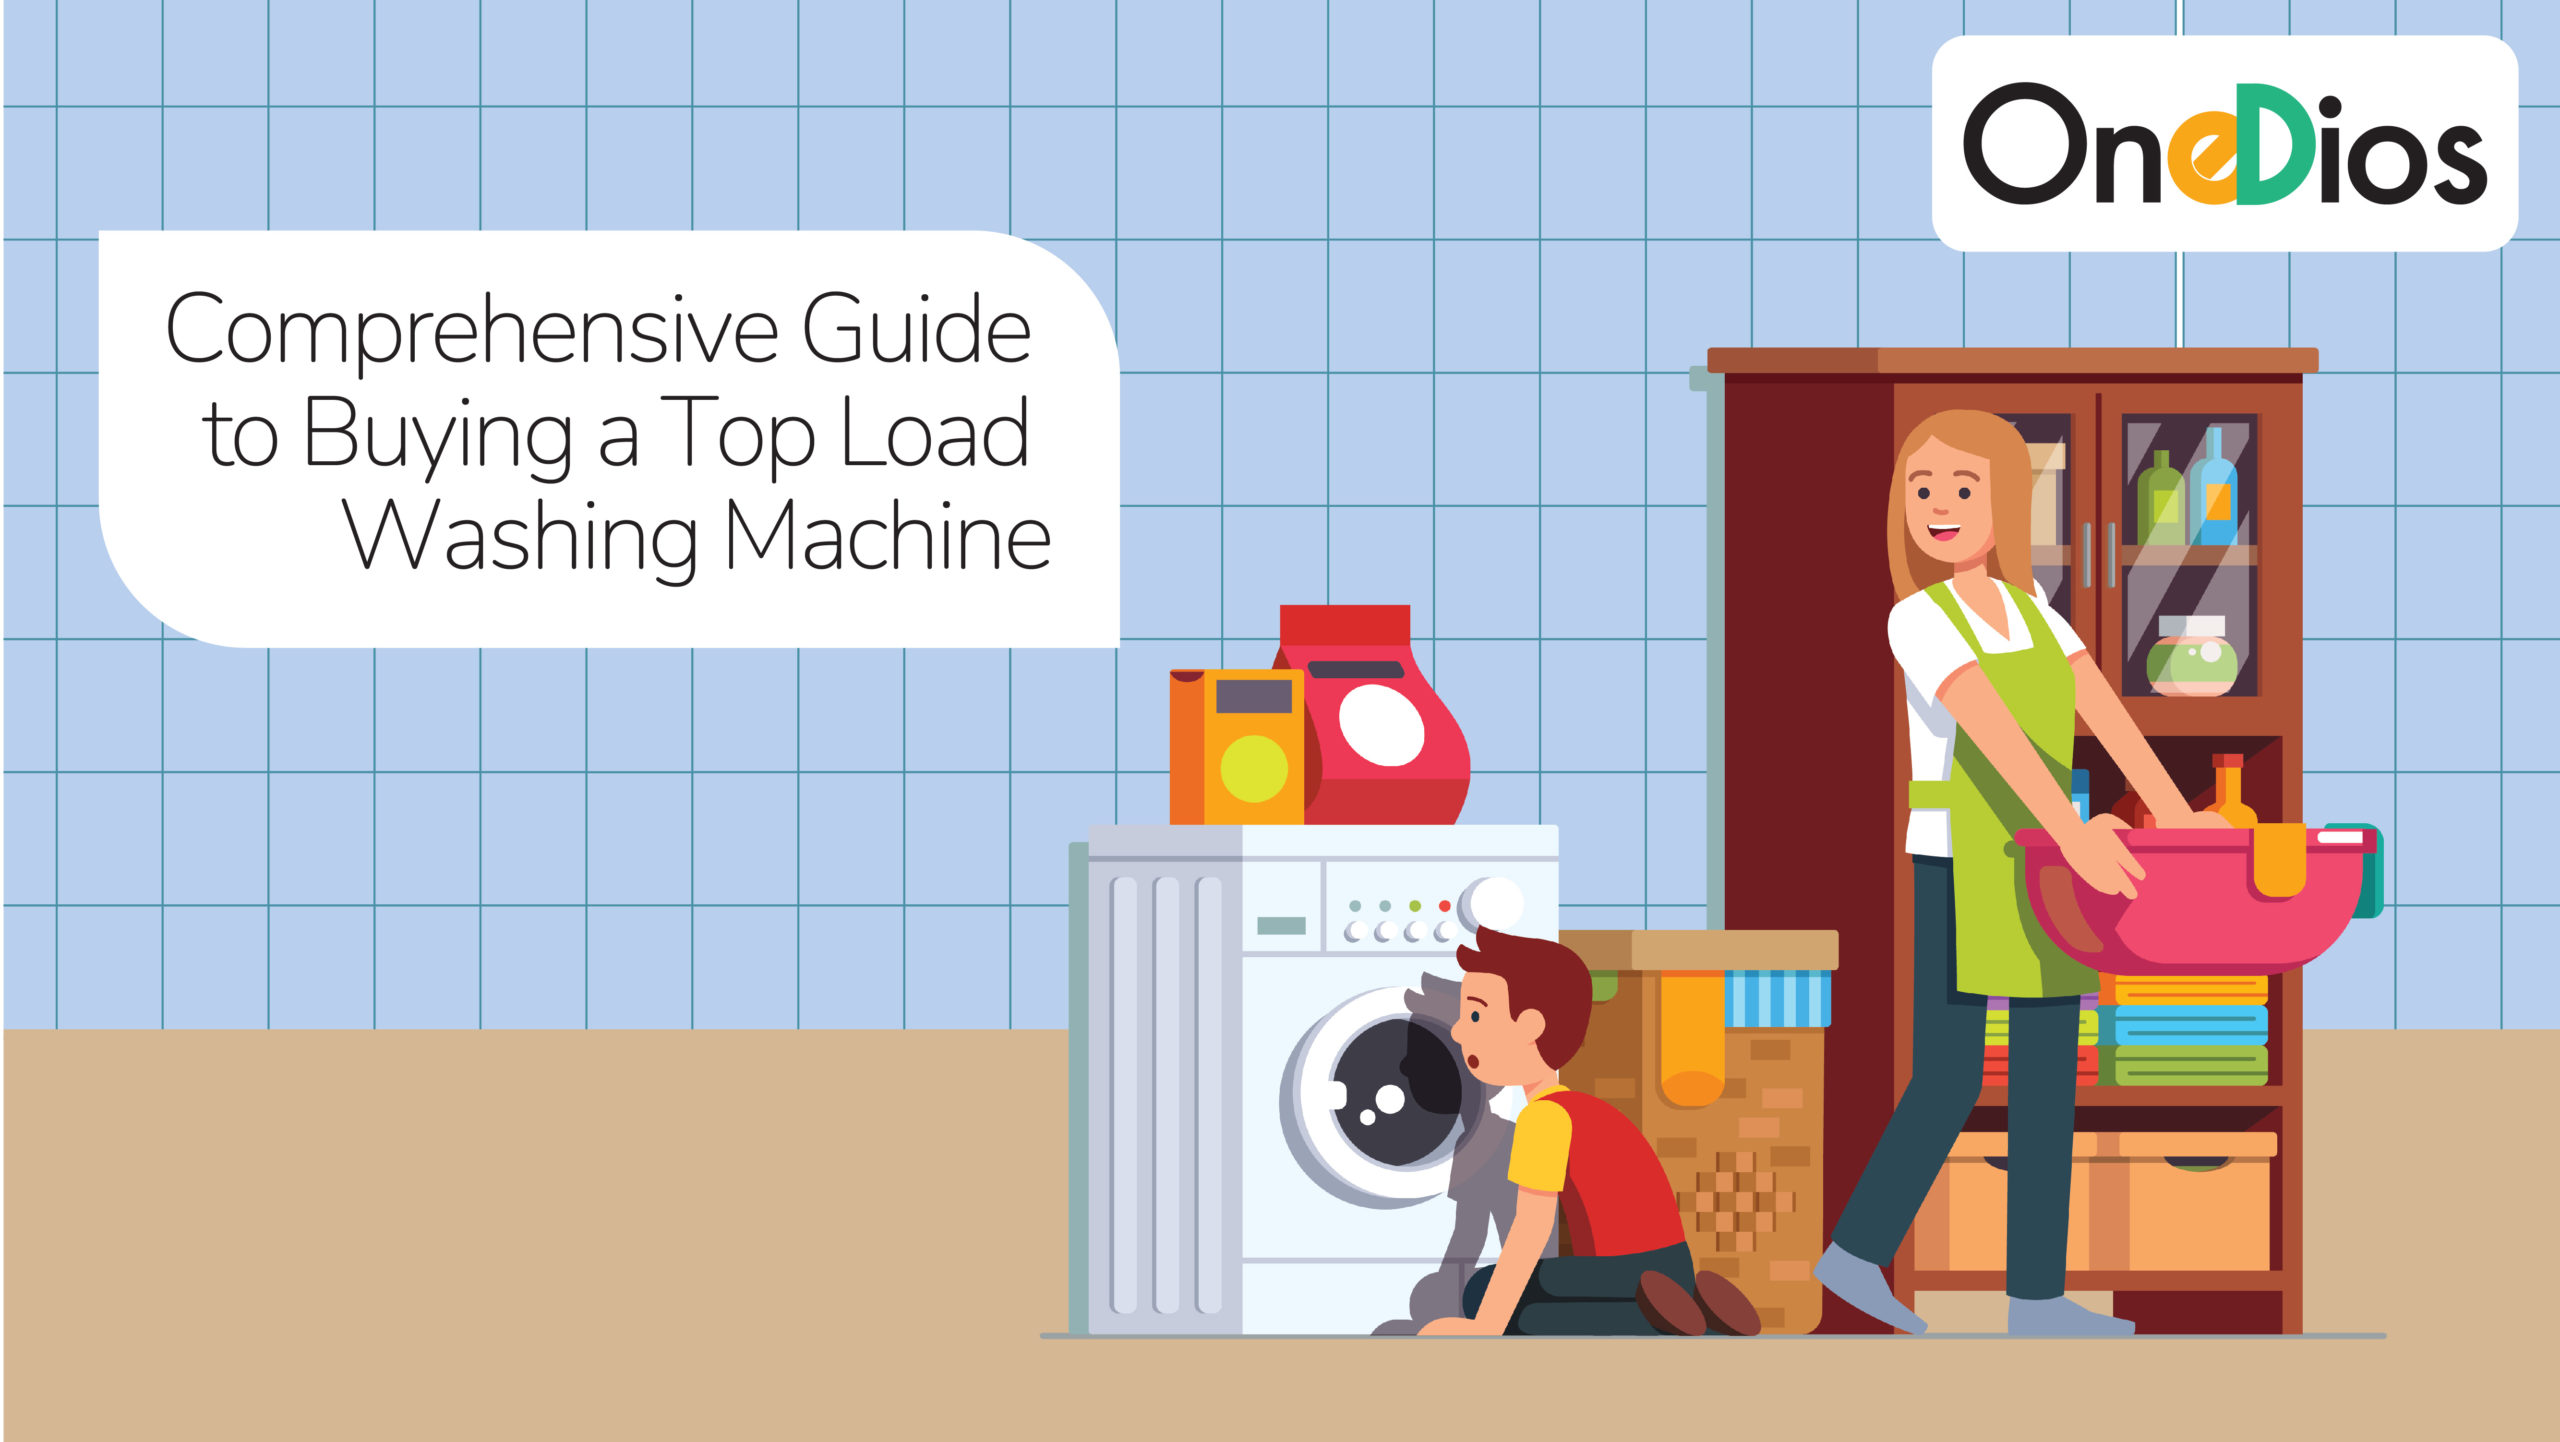 Comprehensive Guide to Buying a Fully Automatic Washing Machine